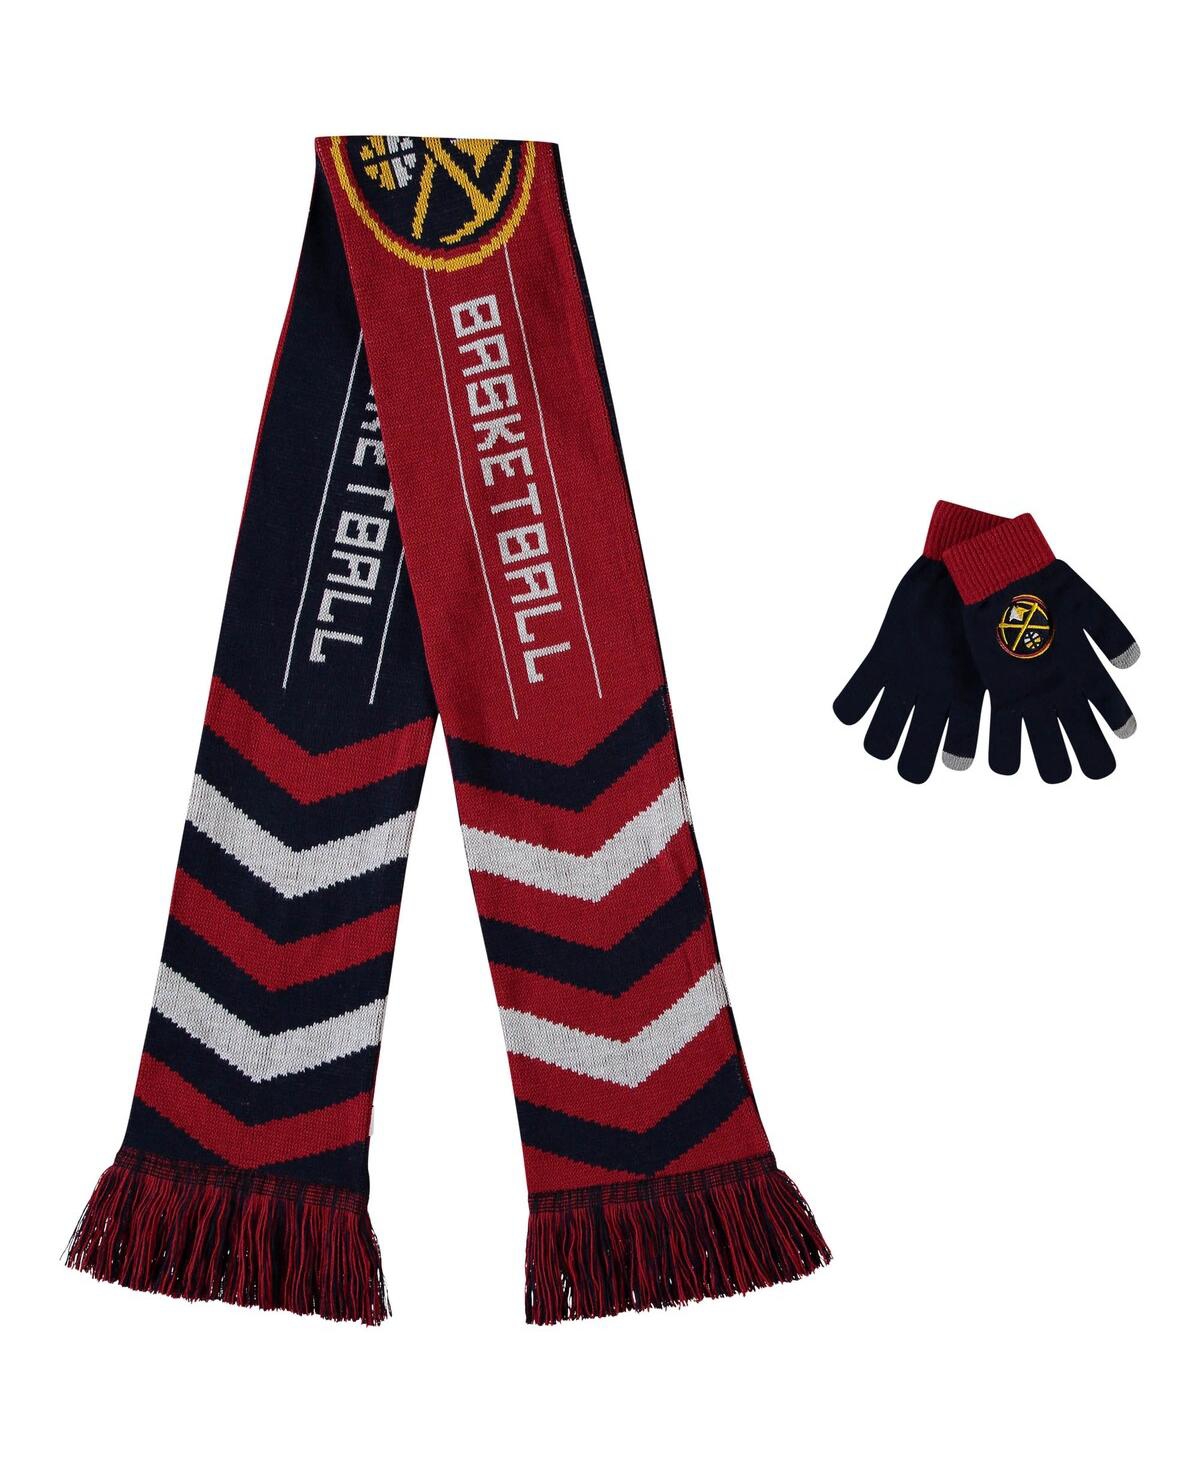 FOCO MEN'S AND WOMEN'S FOCO NAVY DENVER NUGGETS GLOVE AND SCARF COMBO SET